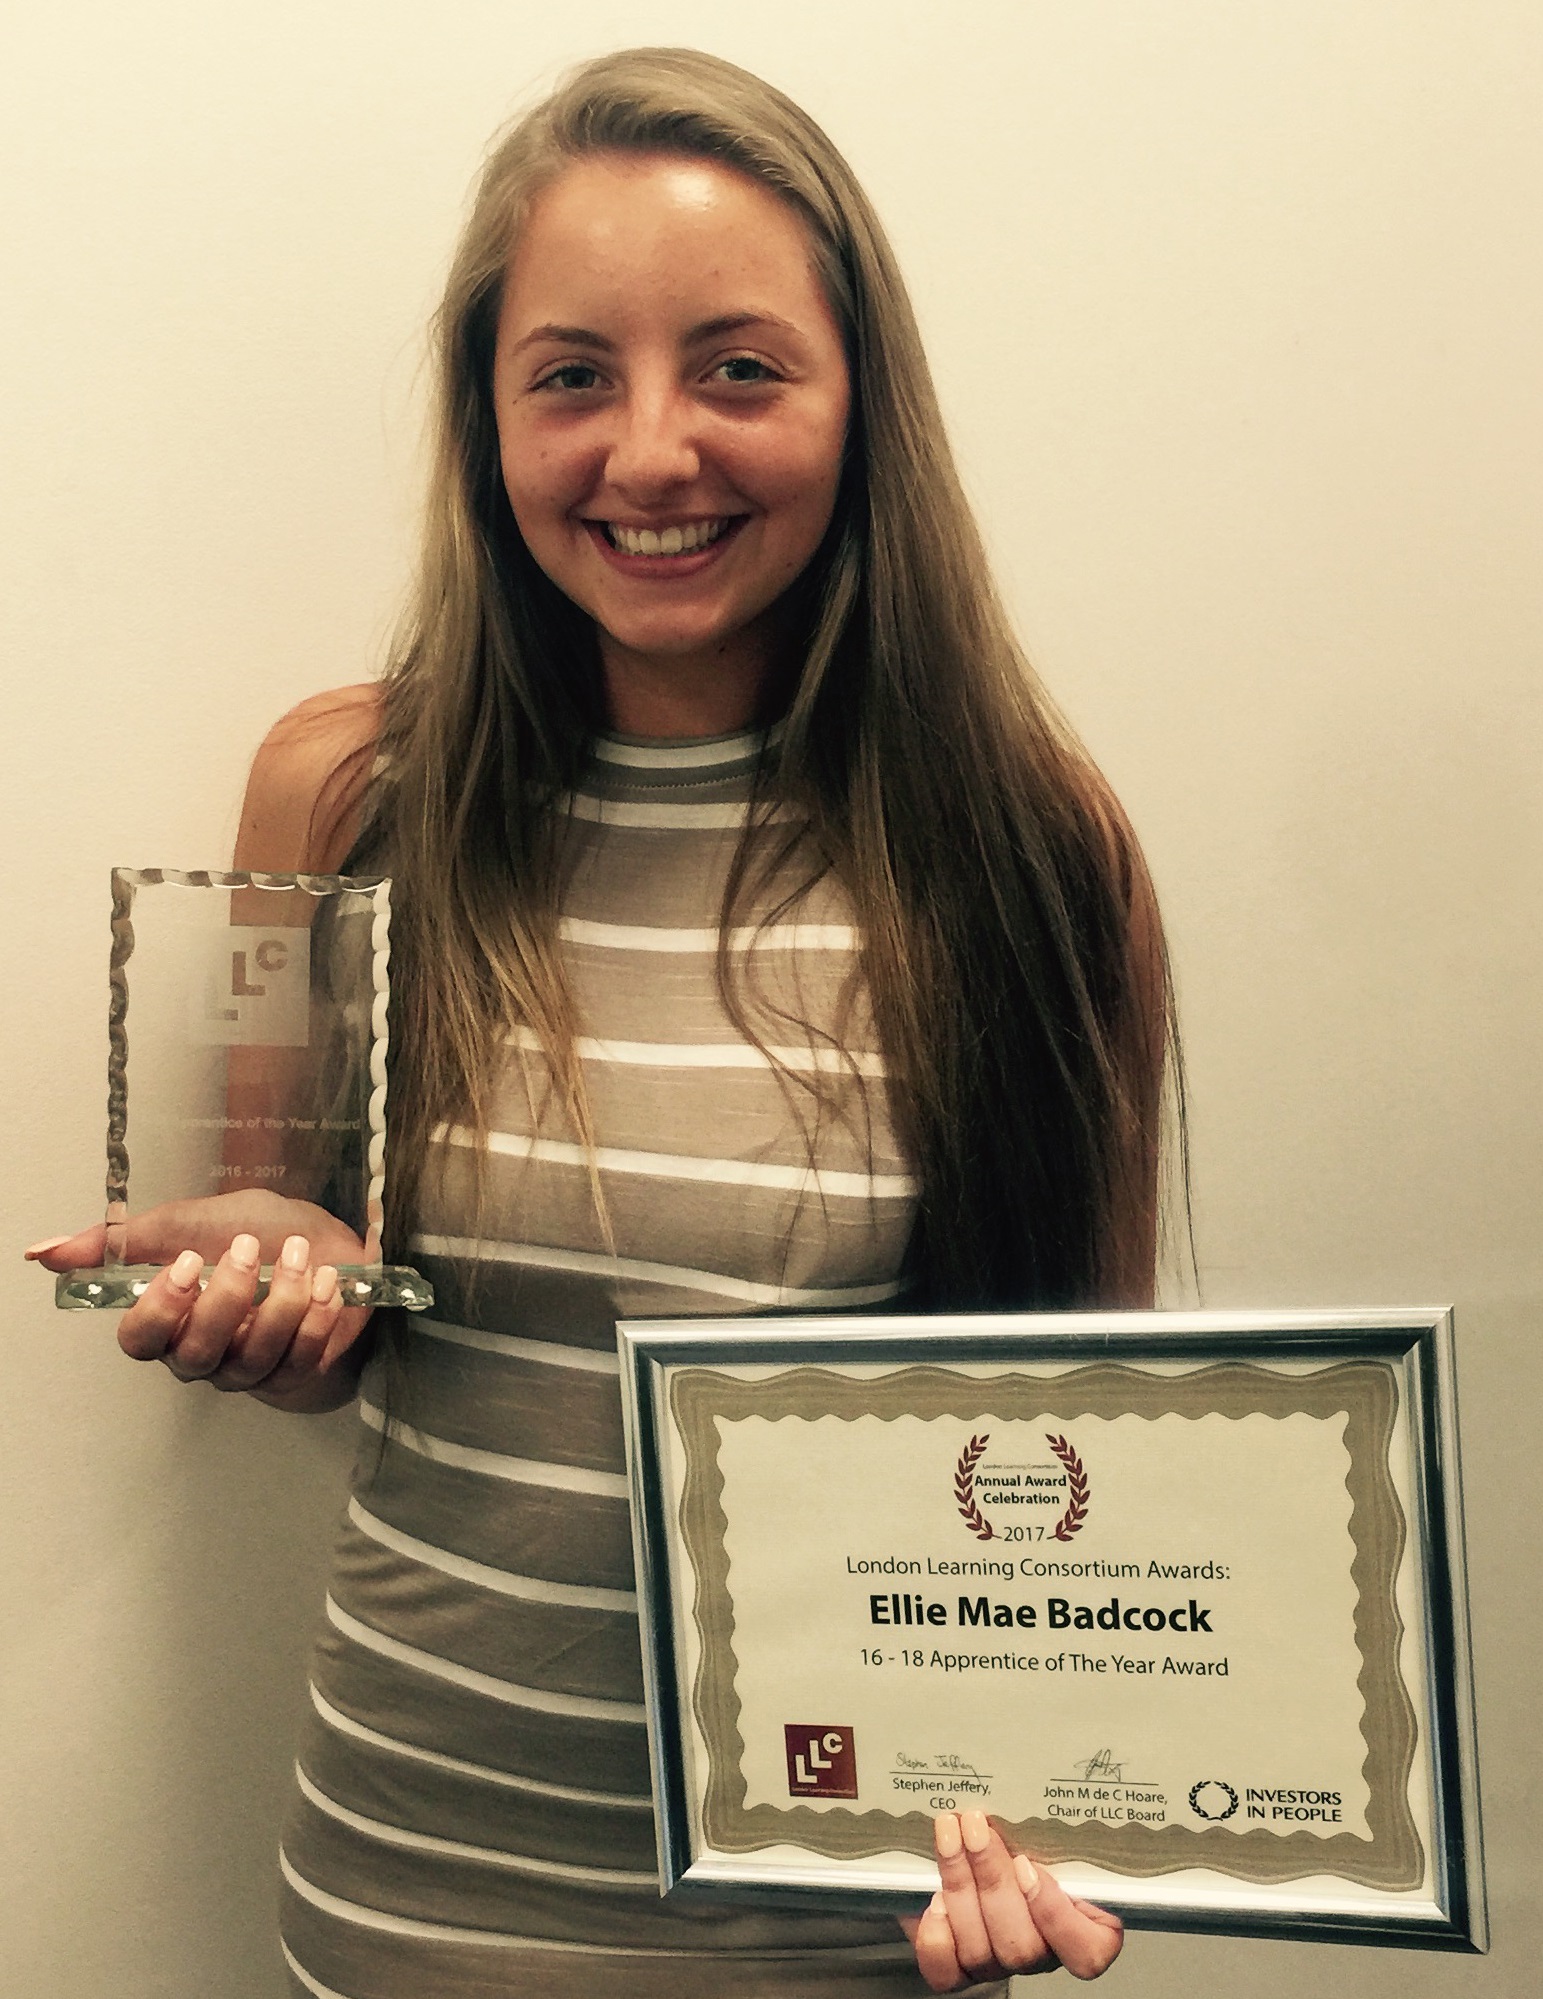 Former Sidcup school girl named 'Apprentice of the Year'